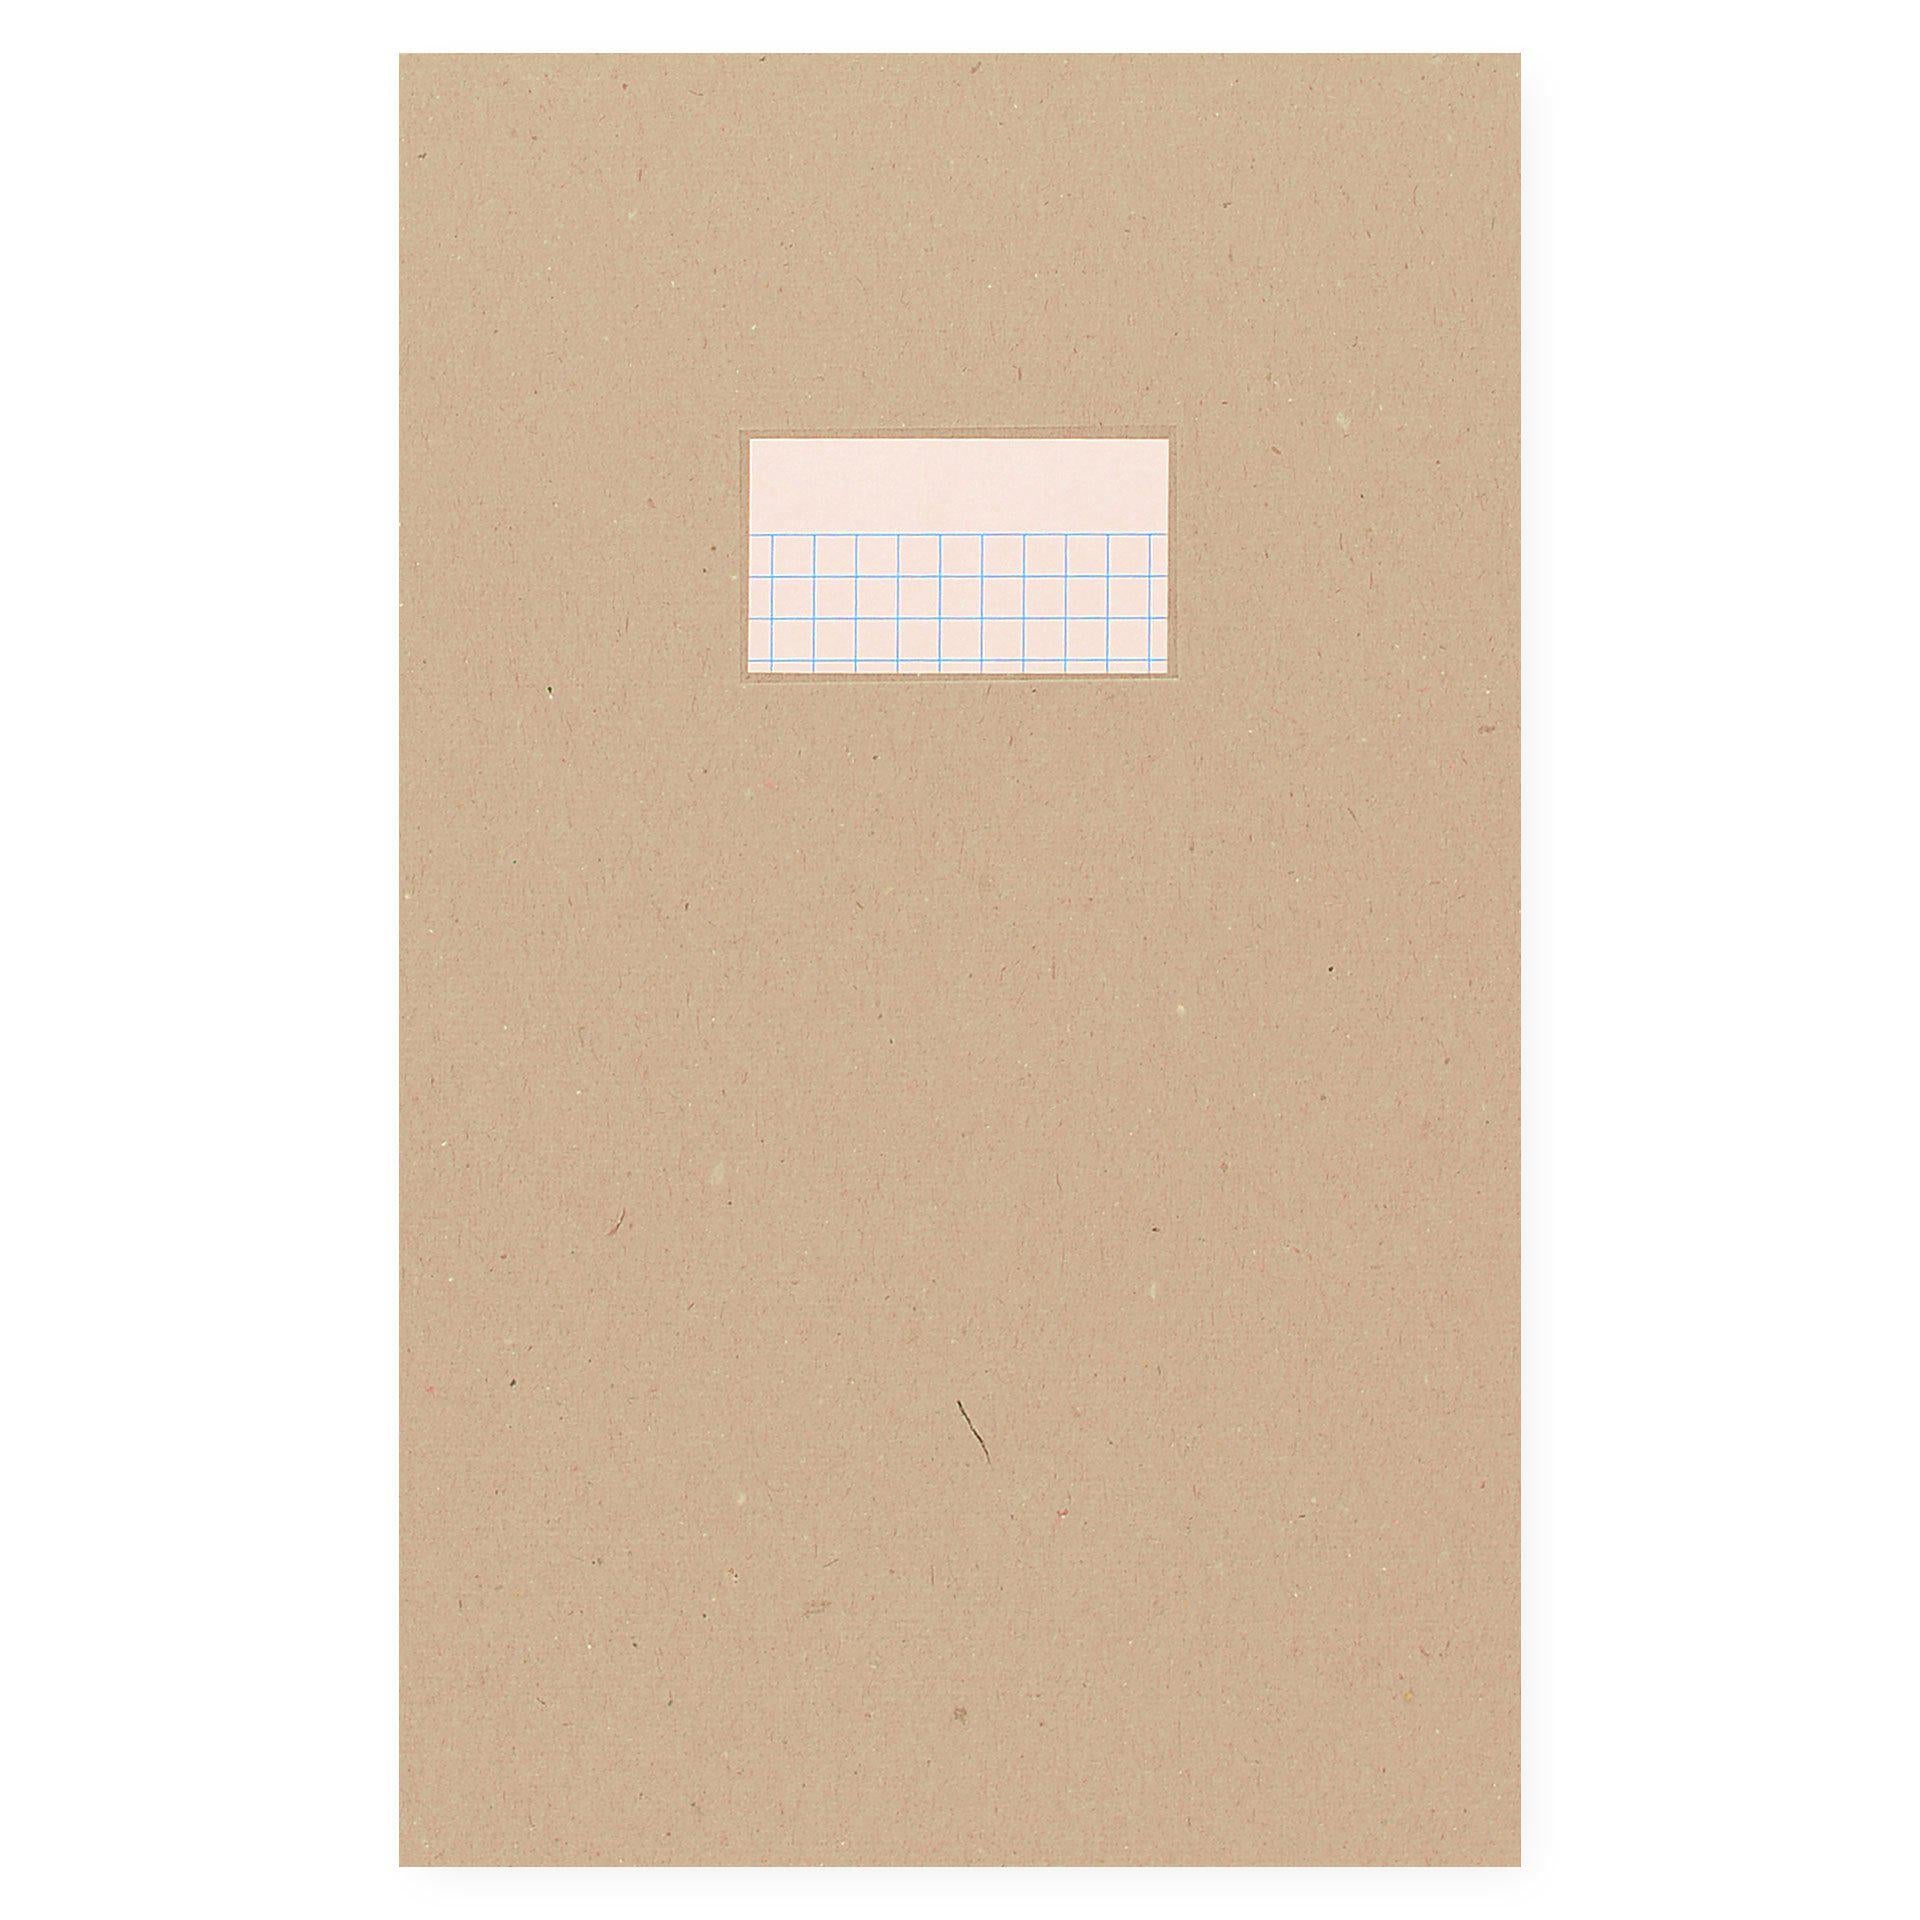 Paperways Patternism Notebook 01 Bald Square 